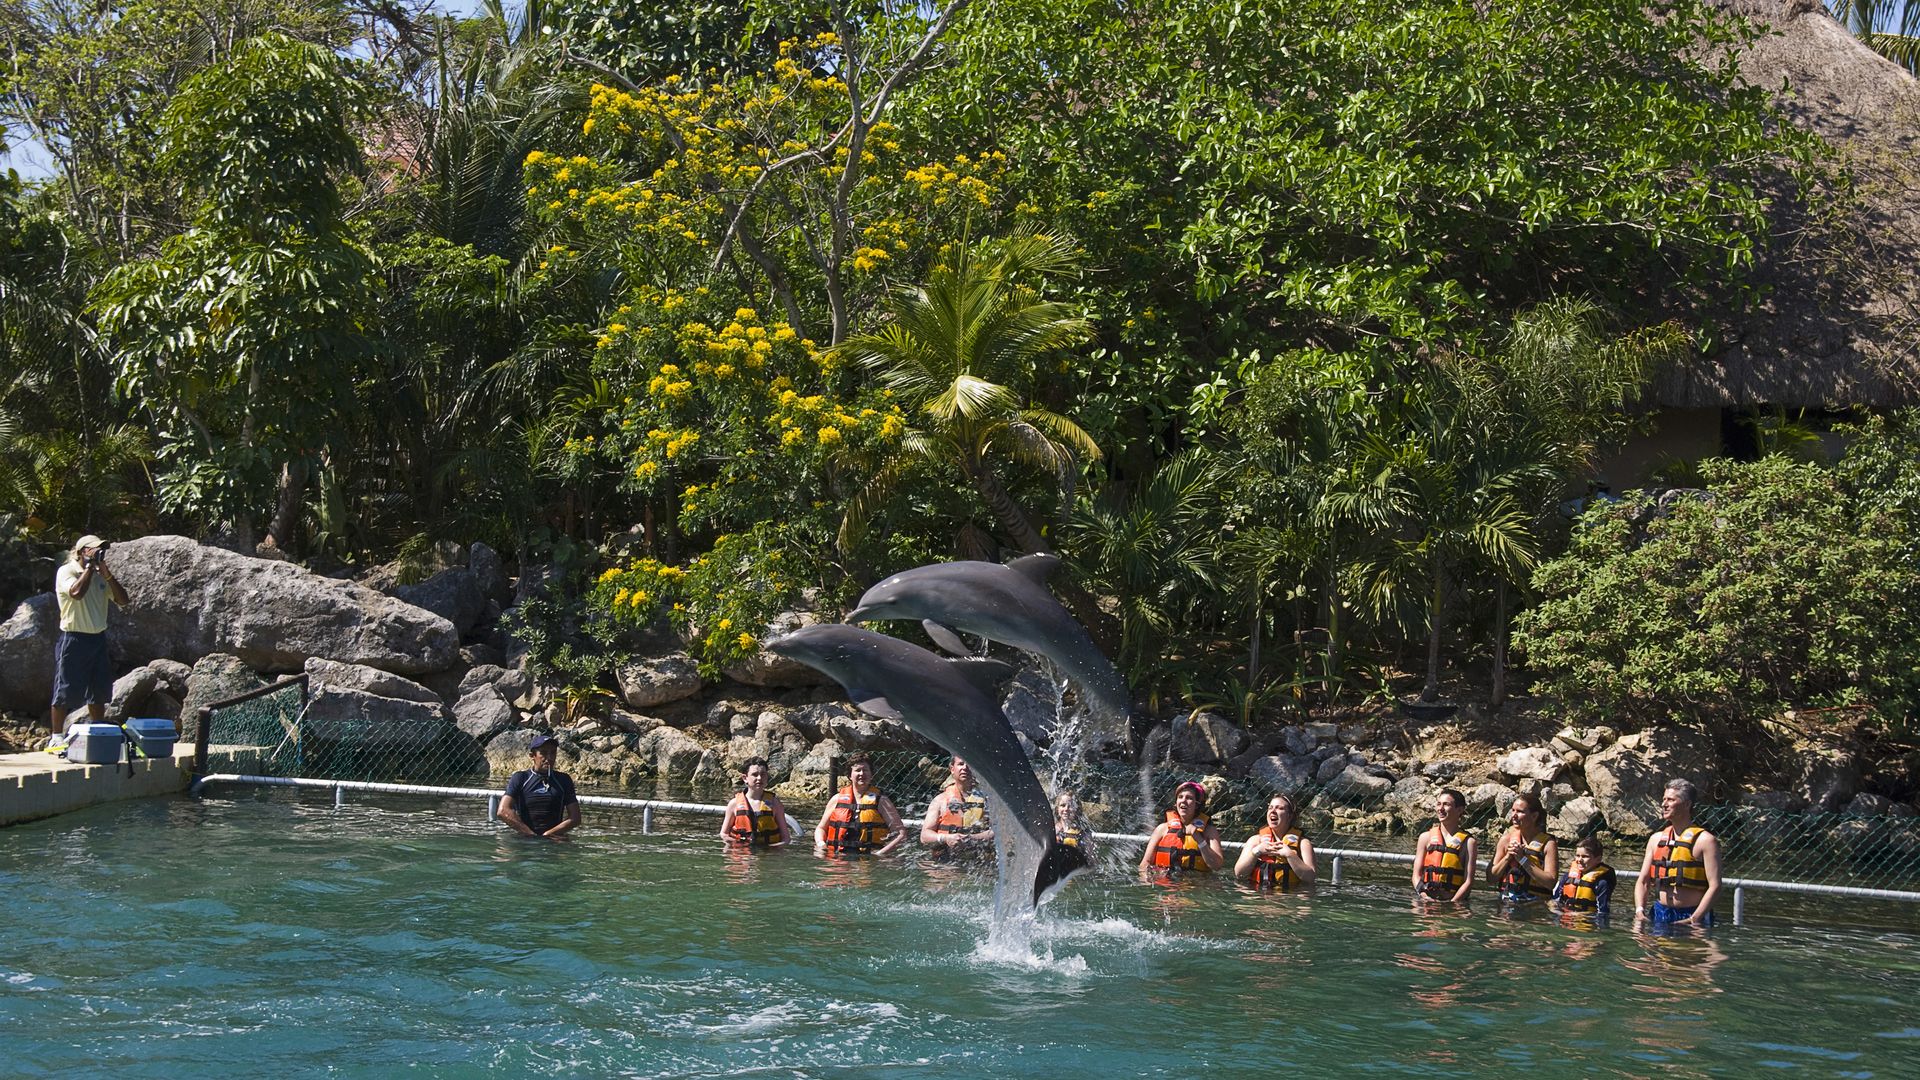 Tourists watch a dolphin leap from the water in Mexico